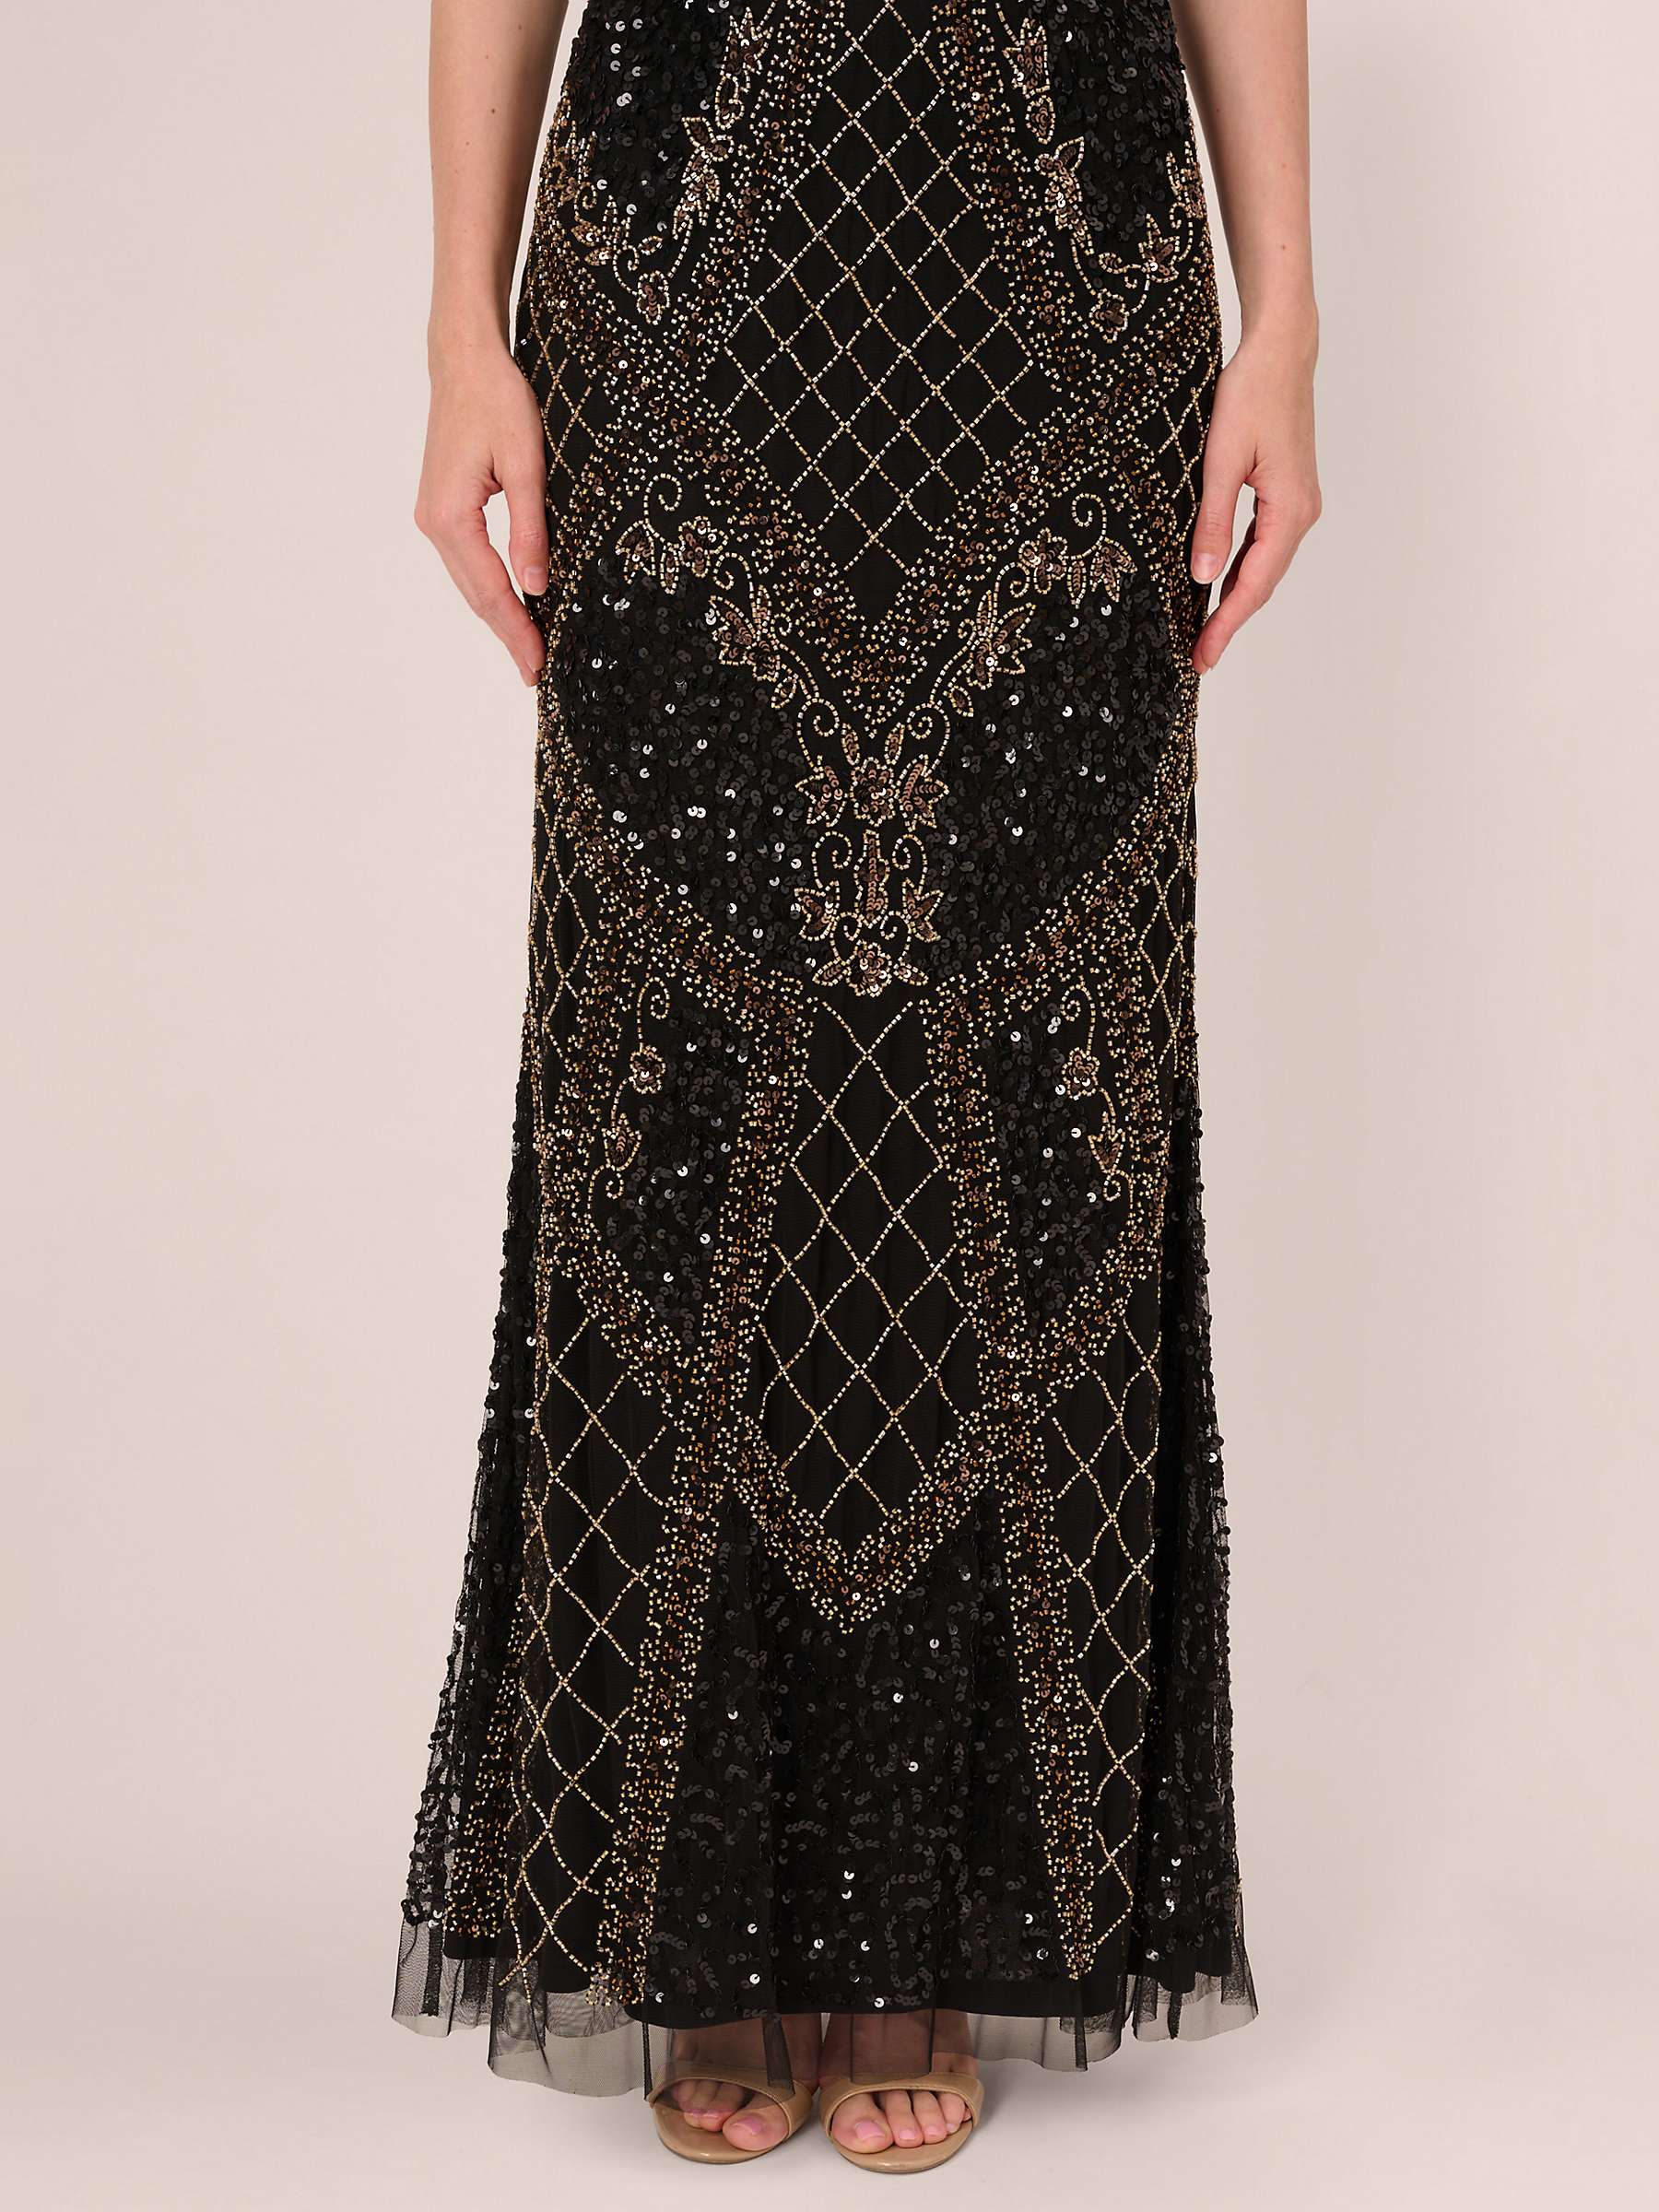 Buy Adrianna Papell Beaded Mesh Maxi Dress, Black/Gold Online at johnlewis.com